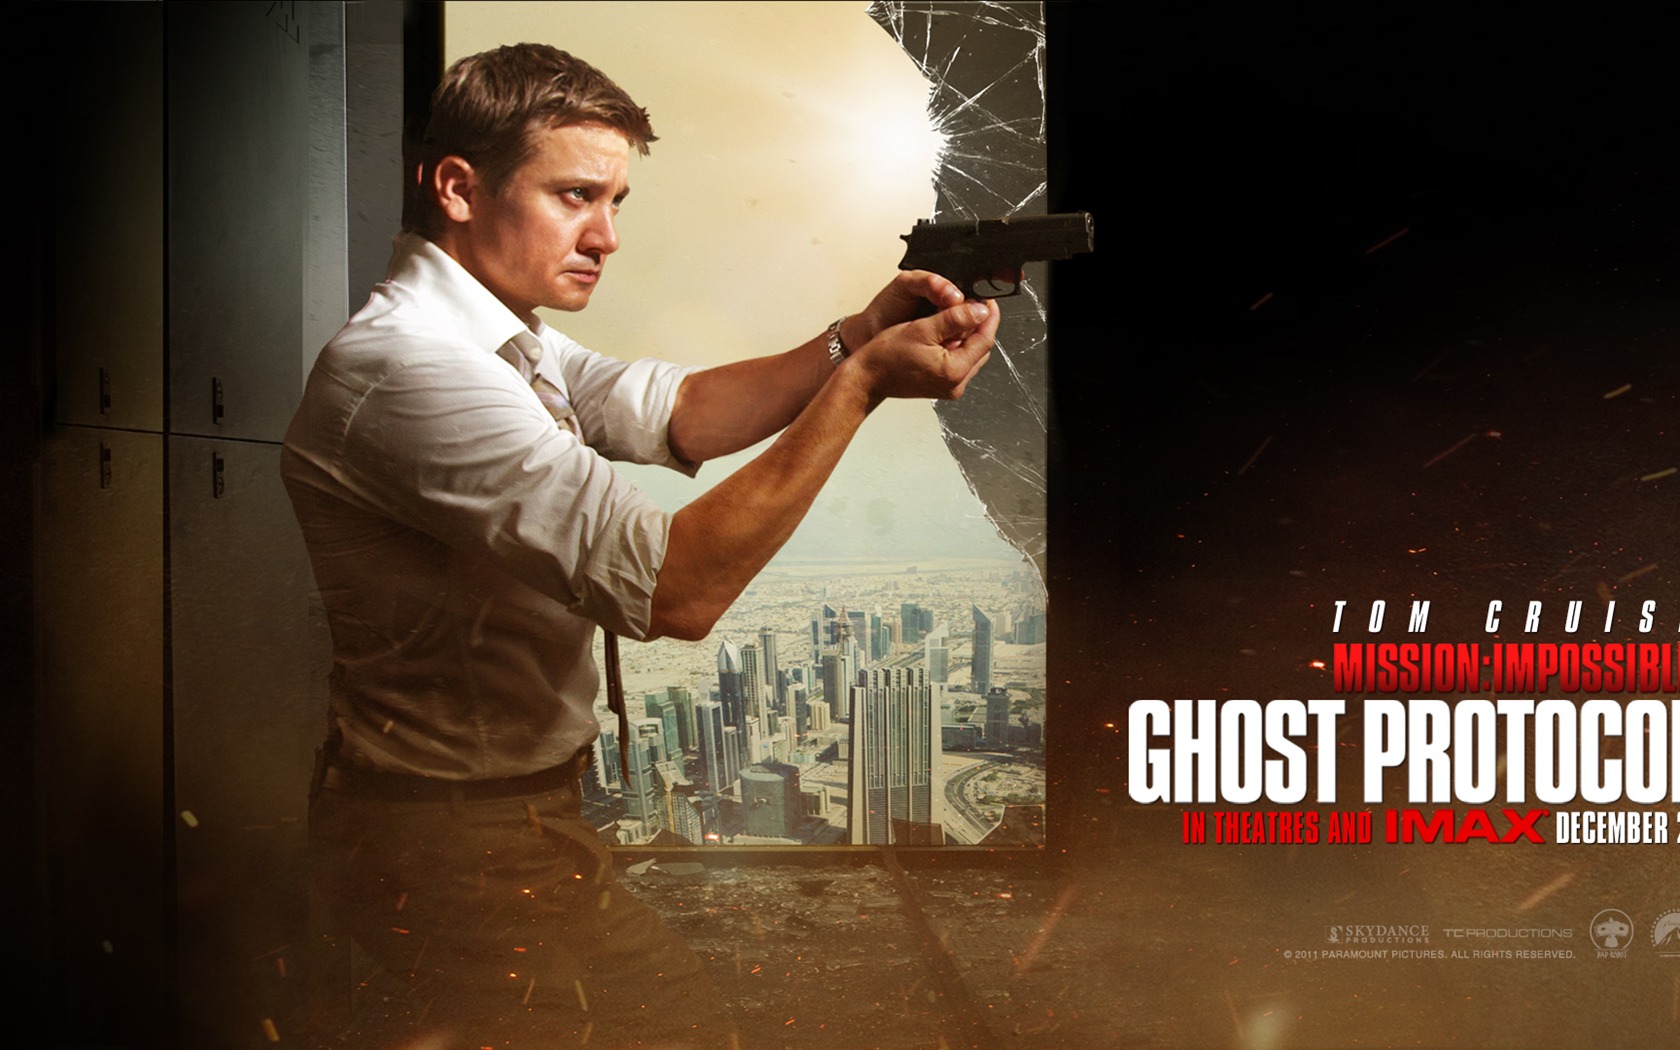 Mission: Impossible - Ghost Protocol HD Wallpapers #2 - 1680x1050